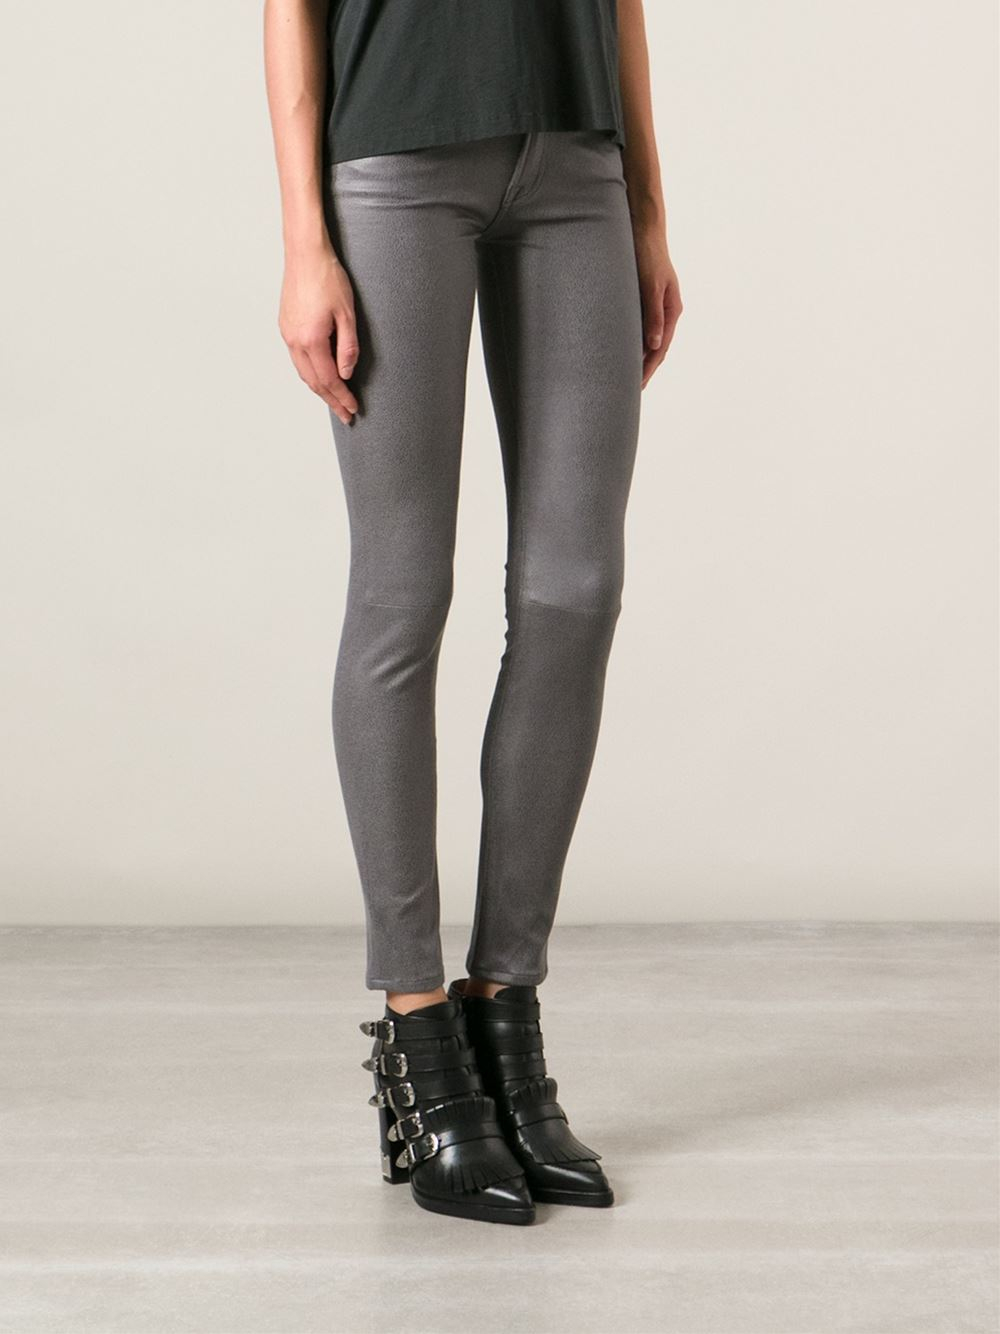 Lyst - 7 For All Mankind Coated Skinny Jeans in Gray